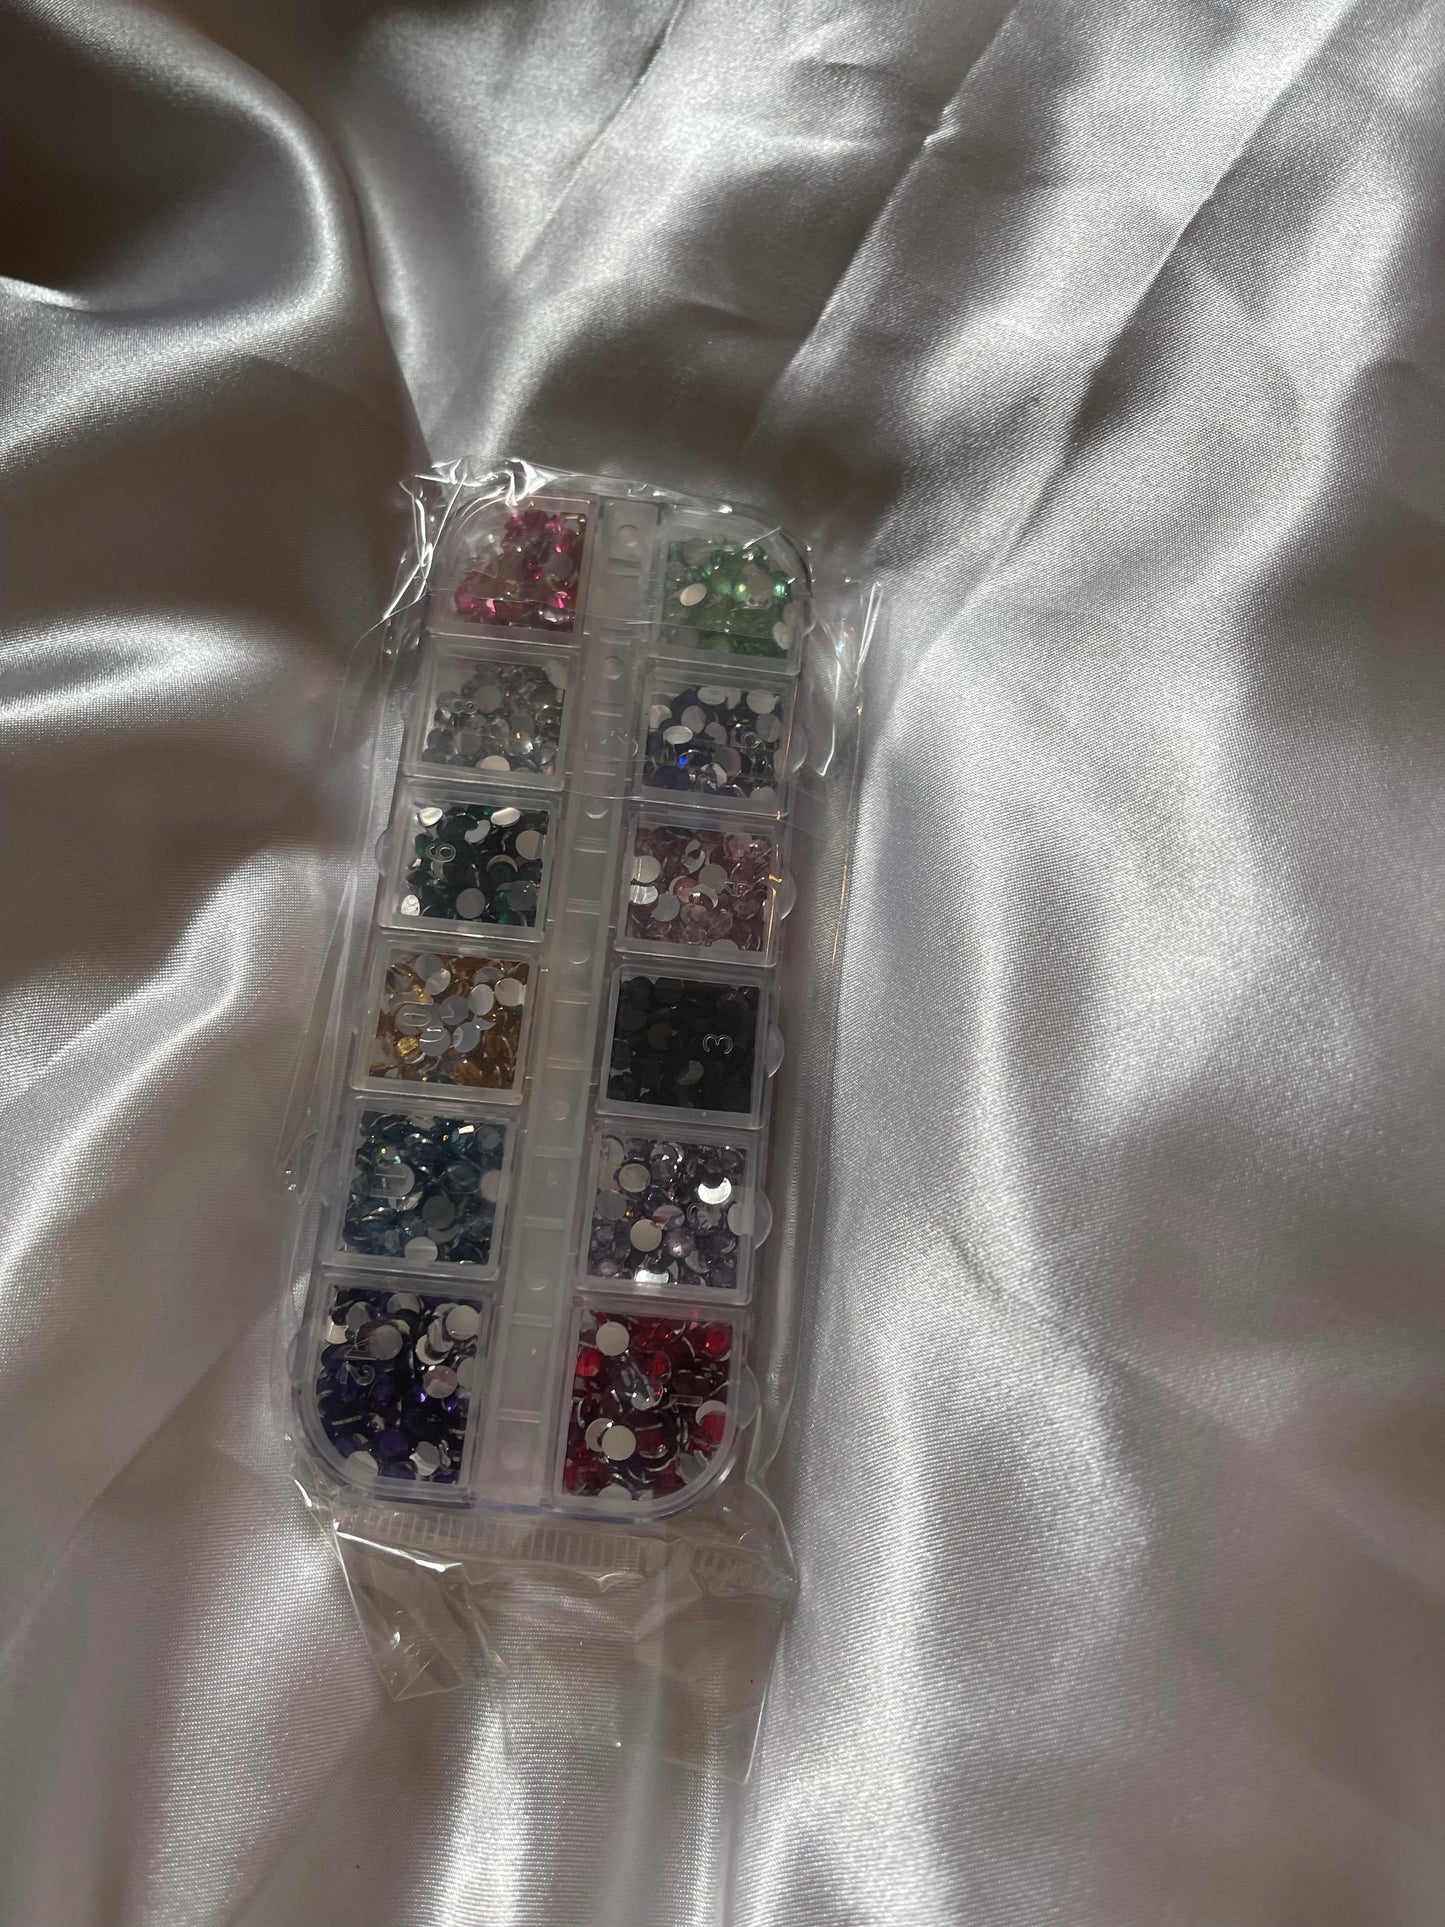 12 ColorResin Silver Back Rhinestones Colors 3 sizes